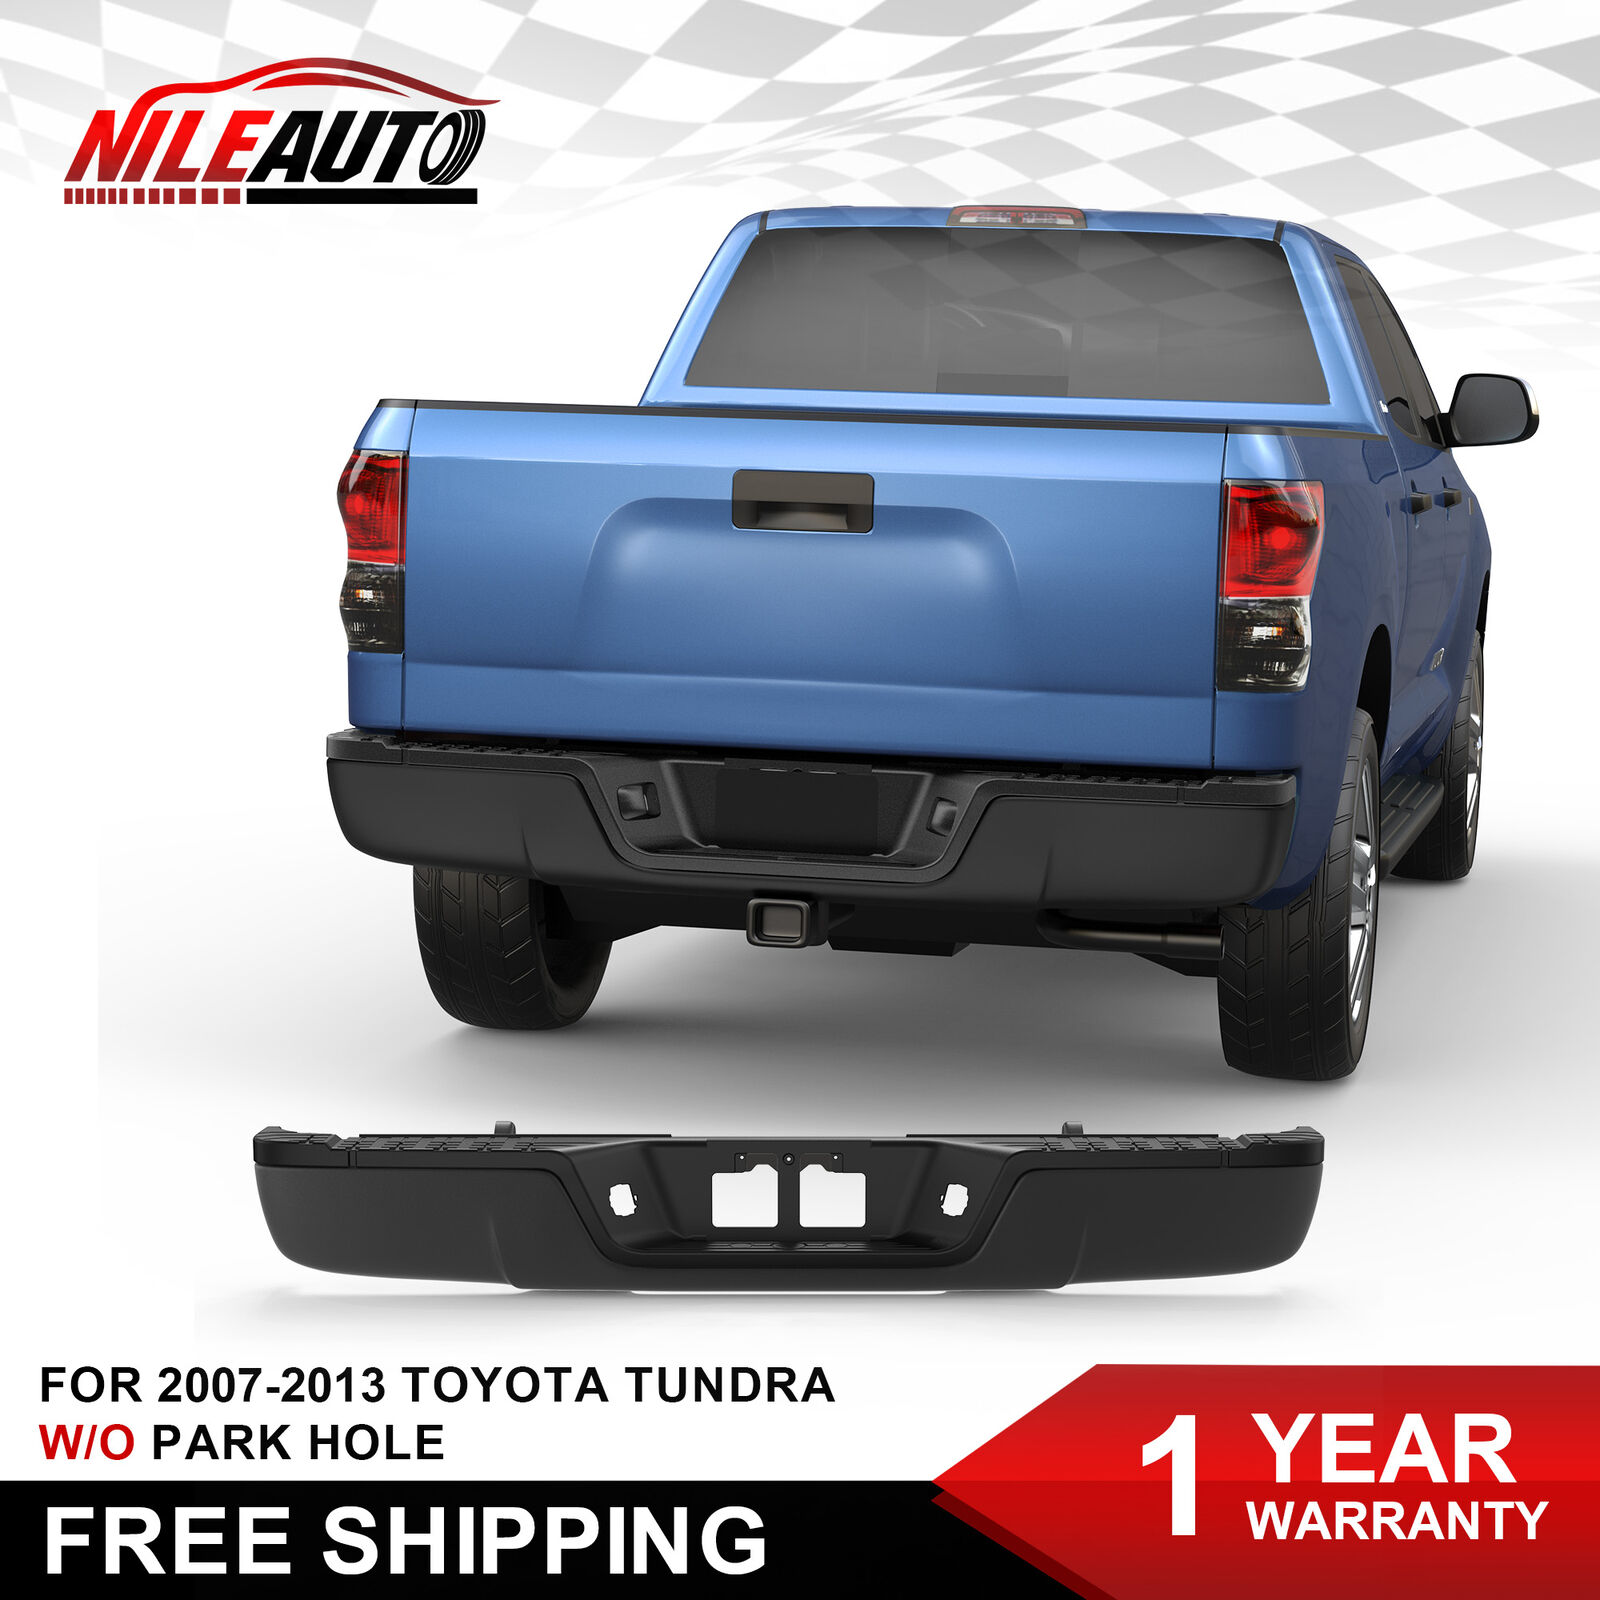 1PC Black Steel Rear Bumper Assembly For 2007-2013 Toyota Tundra W/o Park Assist